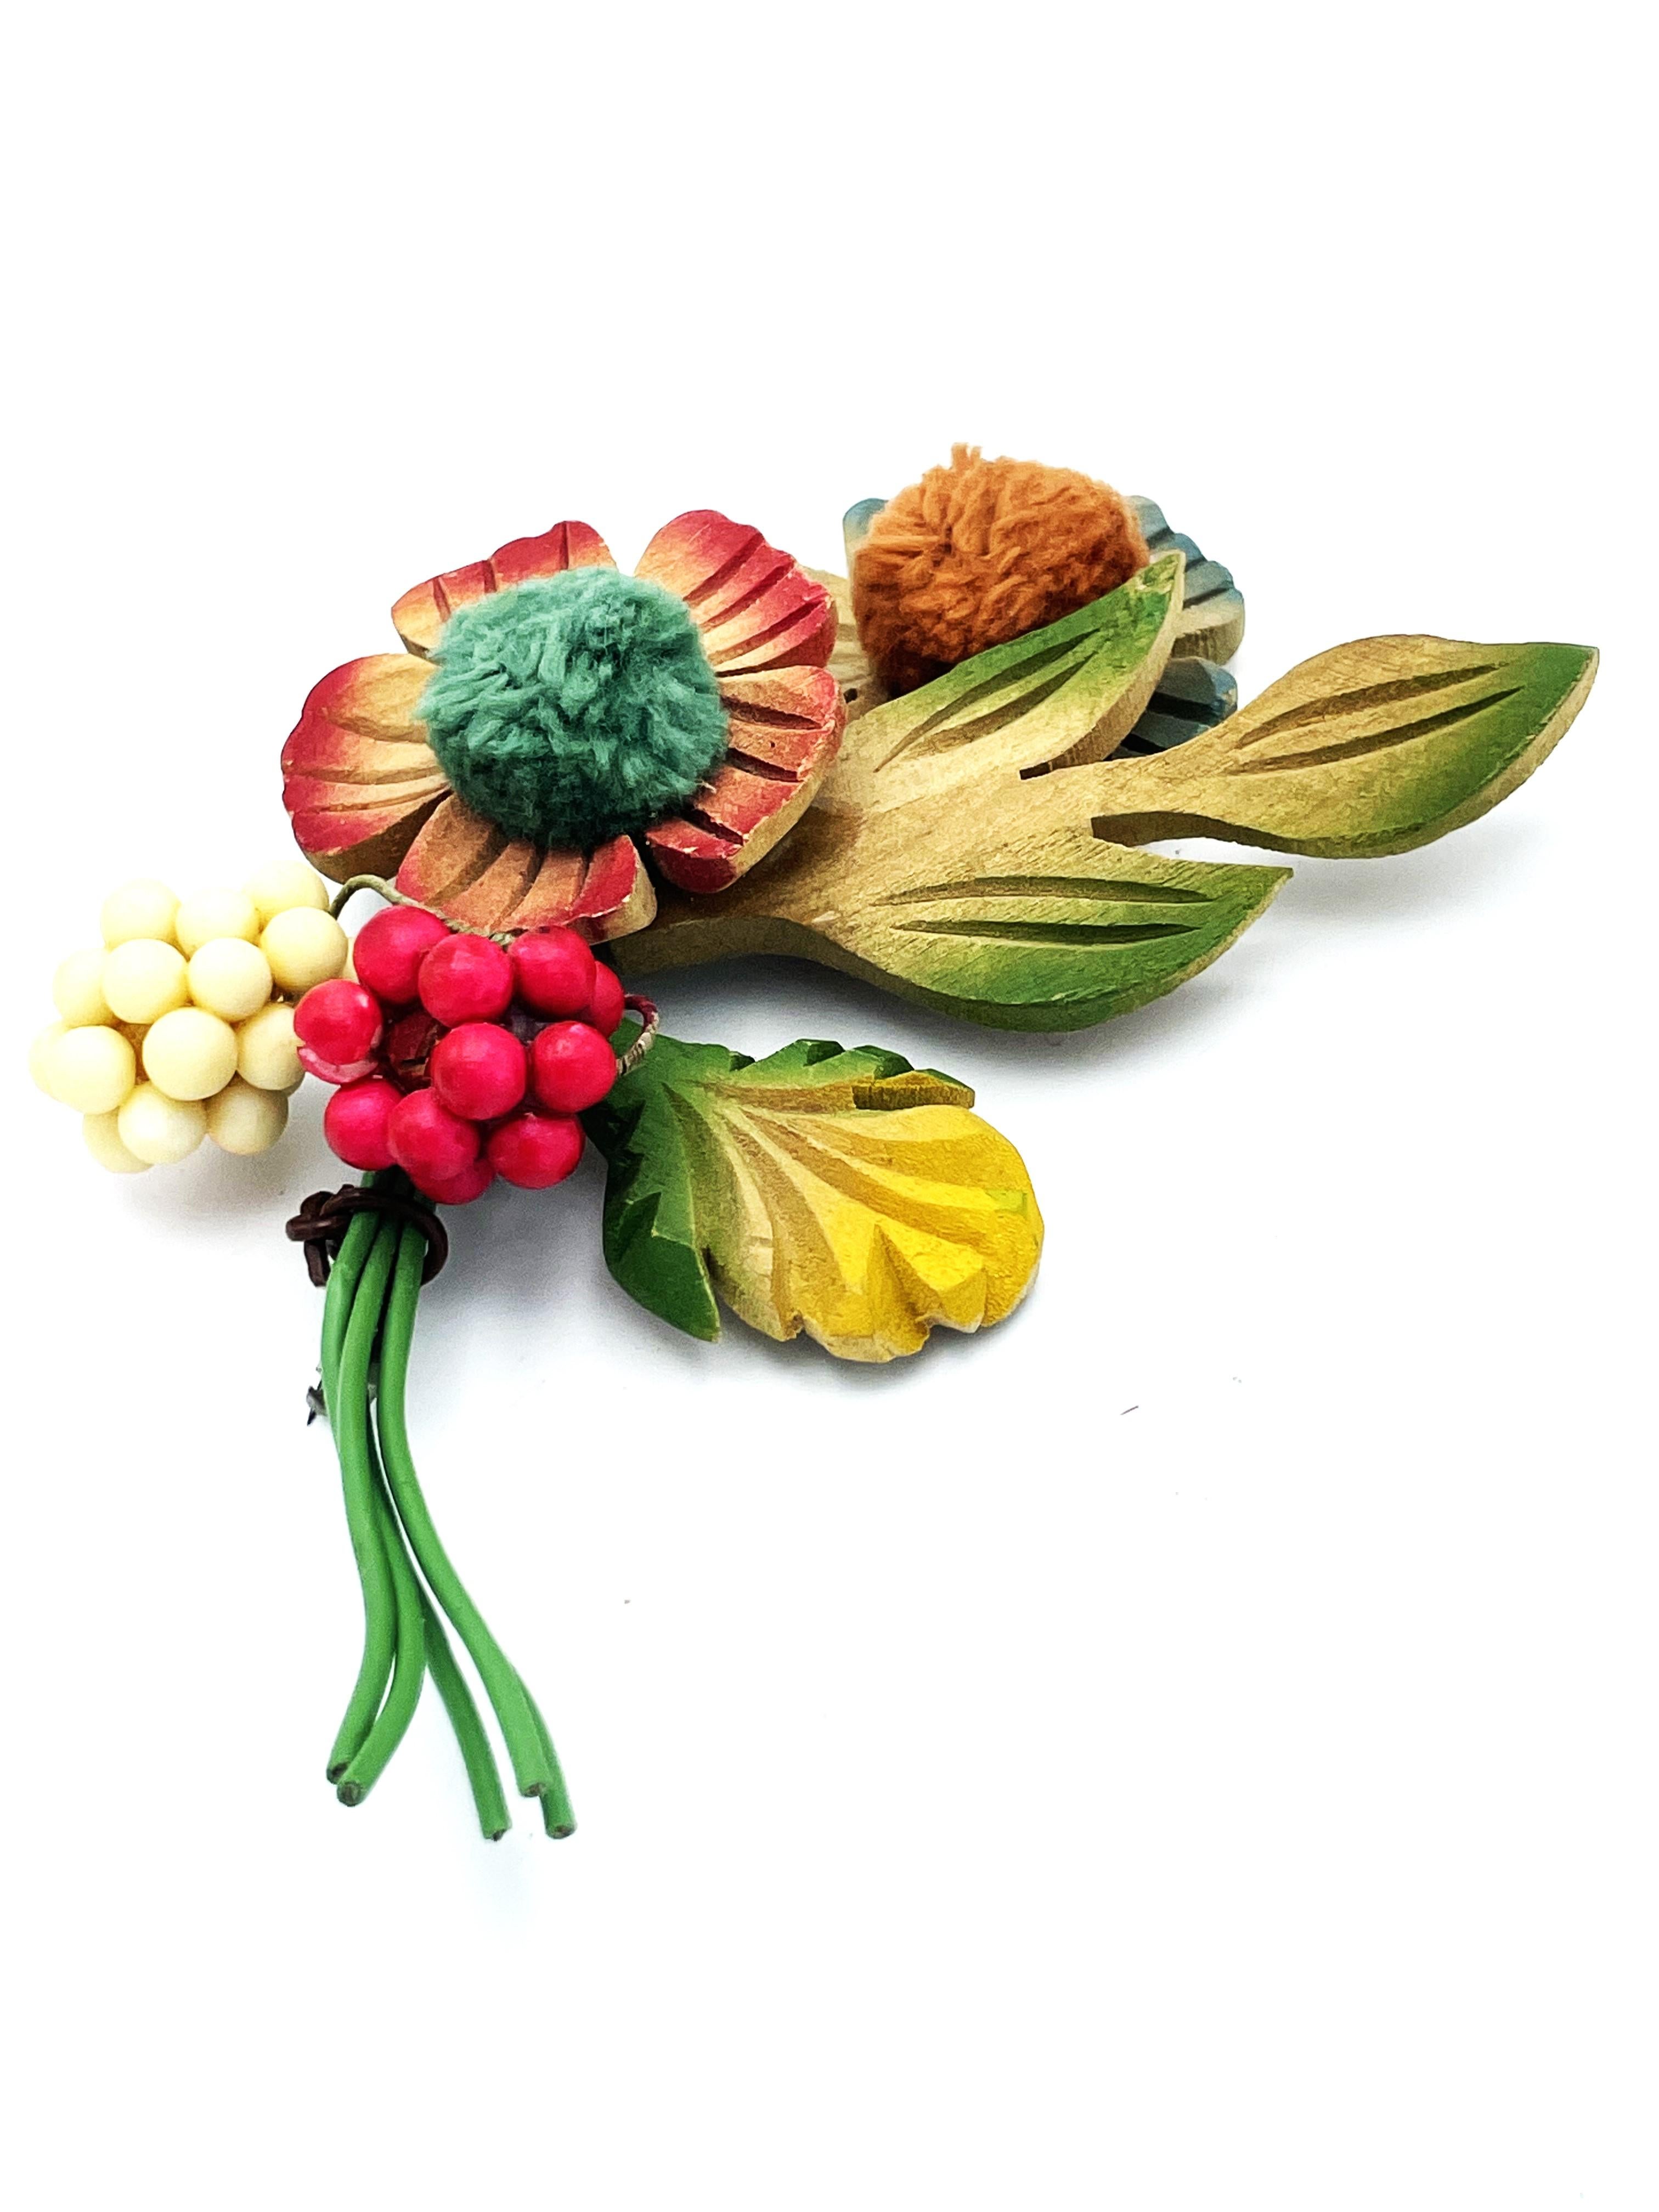 
A lovingly handcrafted brooch made of wood, which was also hand painted. Each piece is made on green-coated wire and assembled into a bouquet. I have collected several brooches like this and think they are from the 1930s/40s USA

Dimensions
Hight 